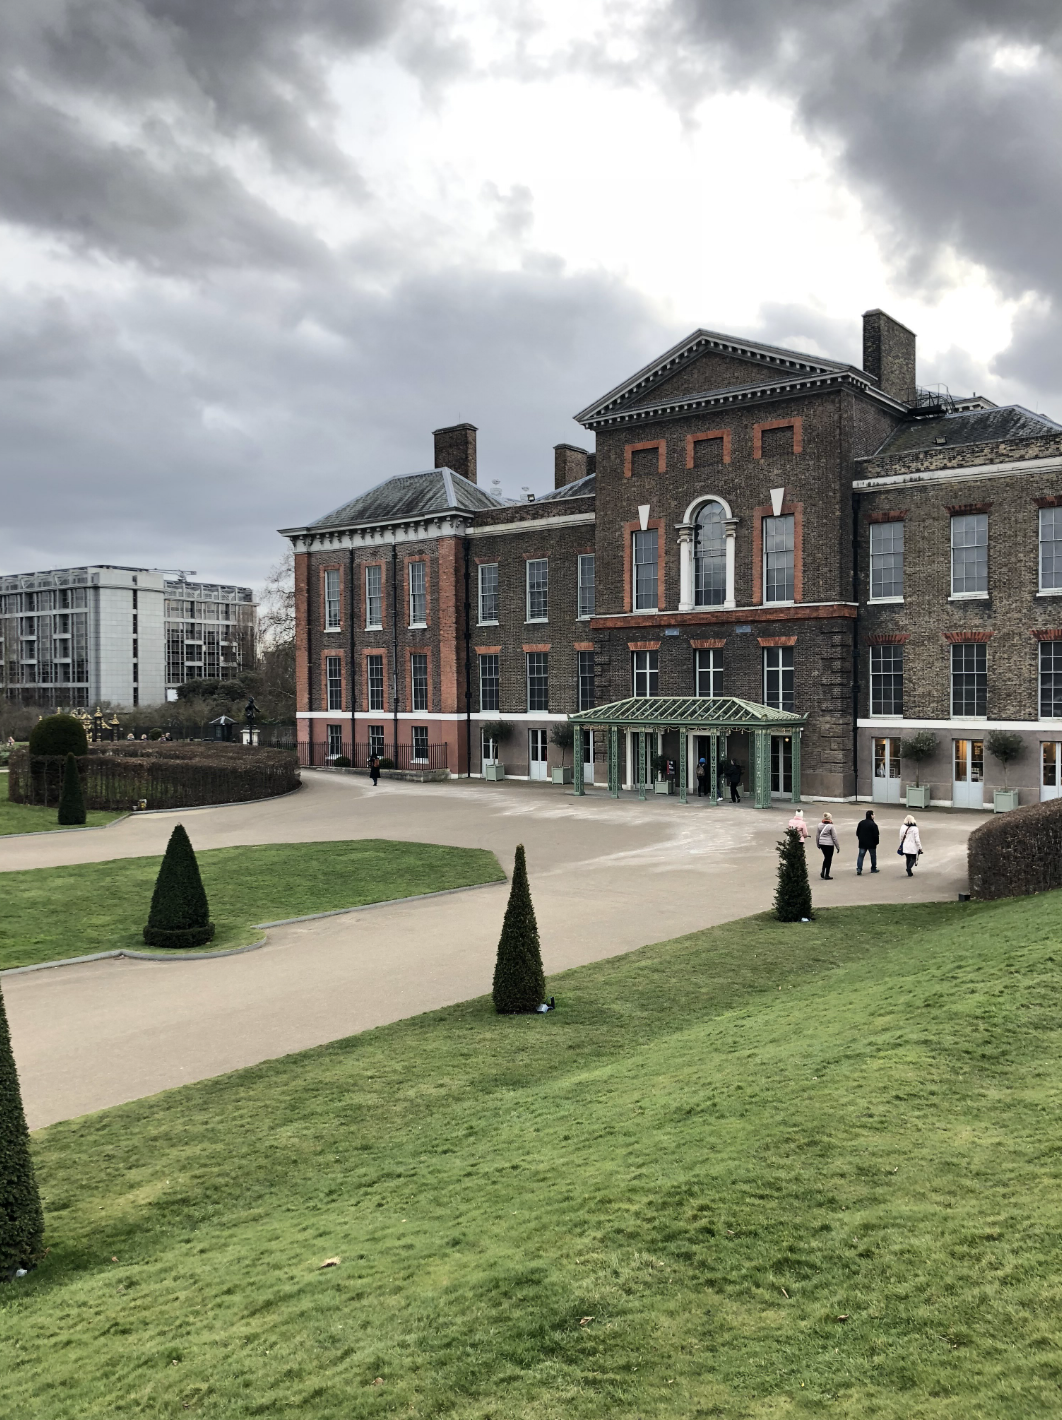 The front entrance of Kensington Palace in London